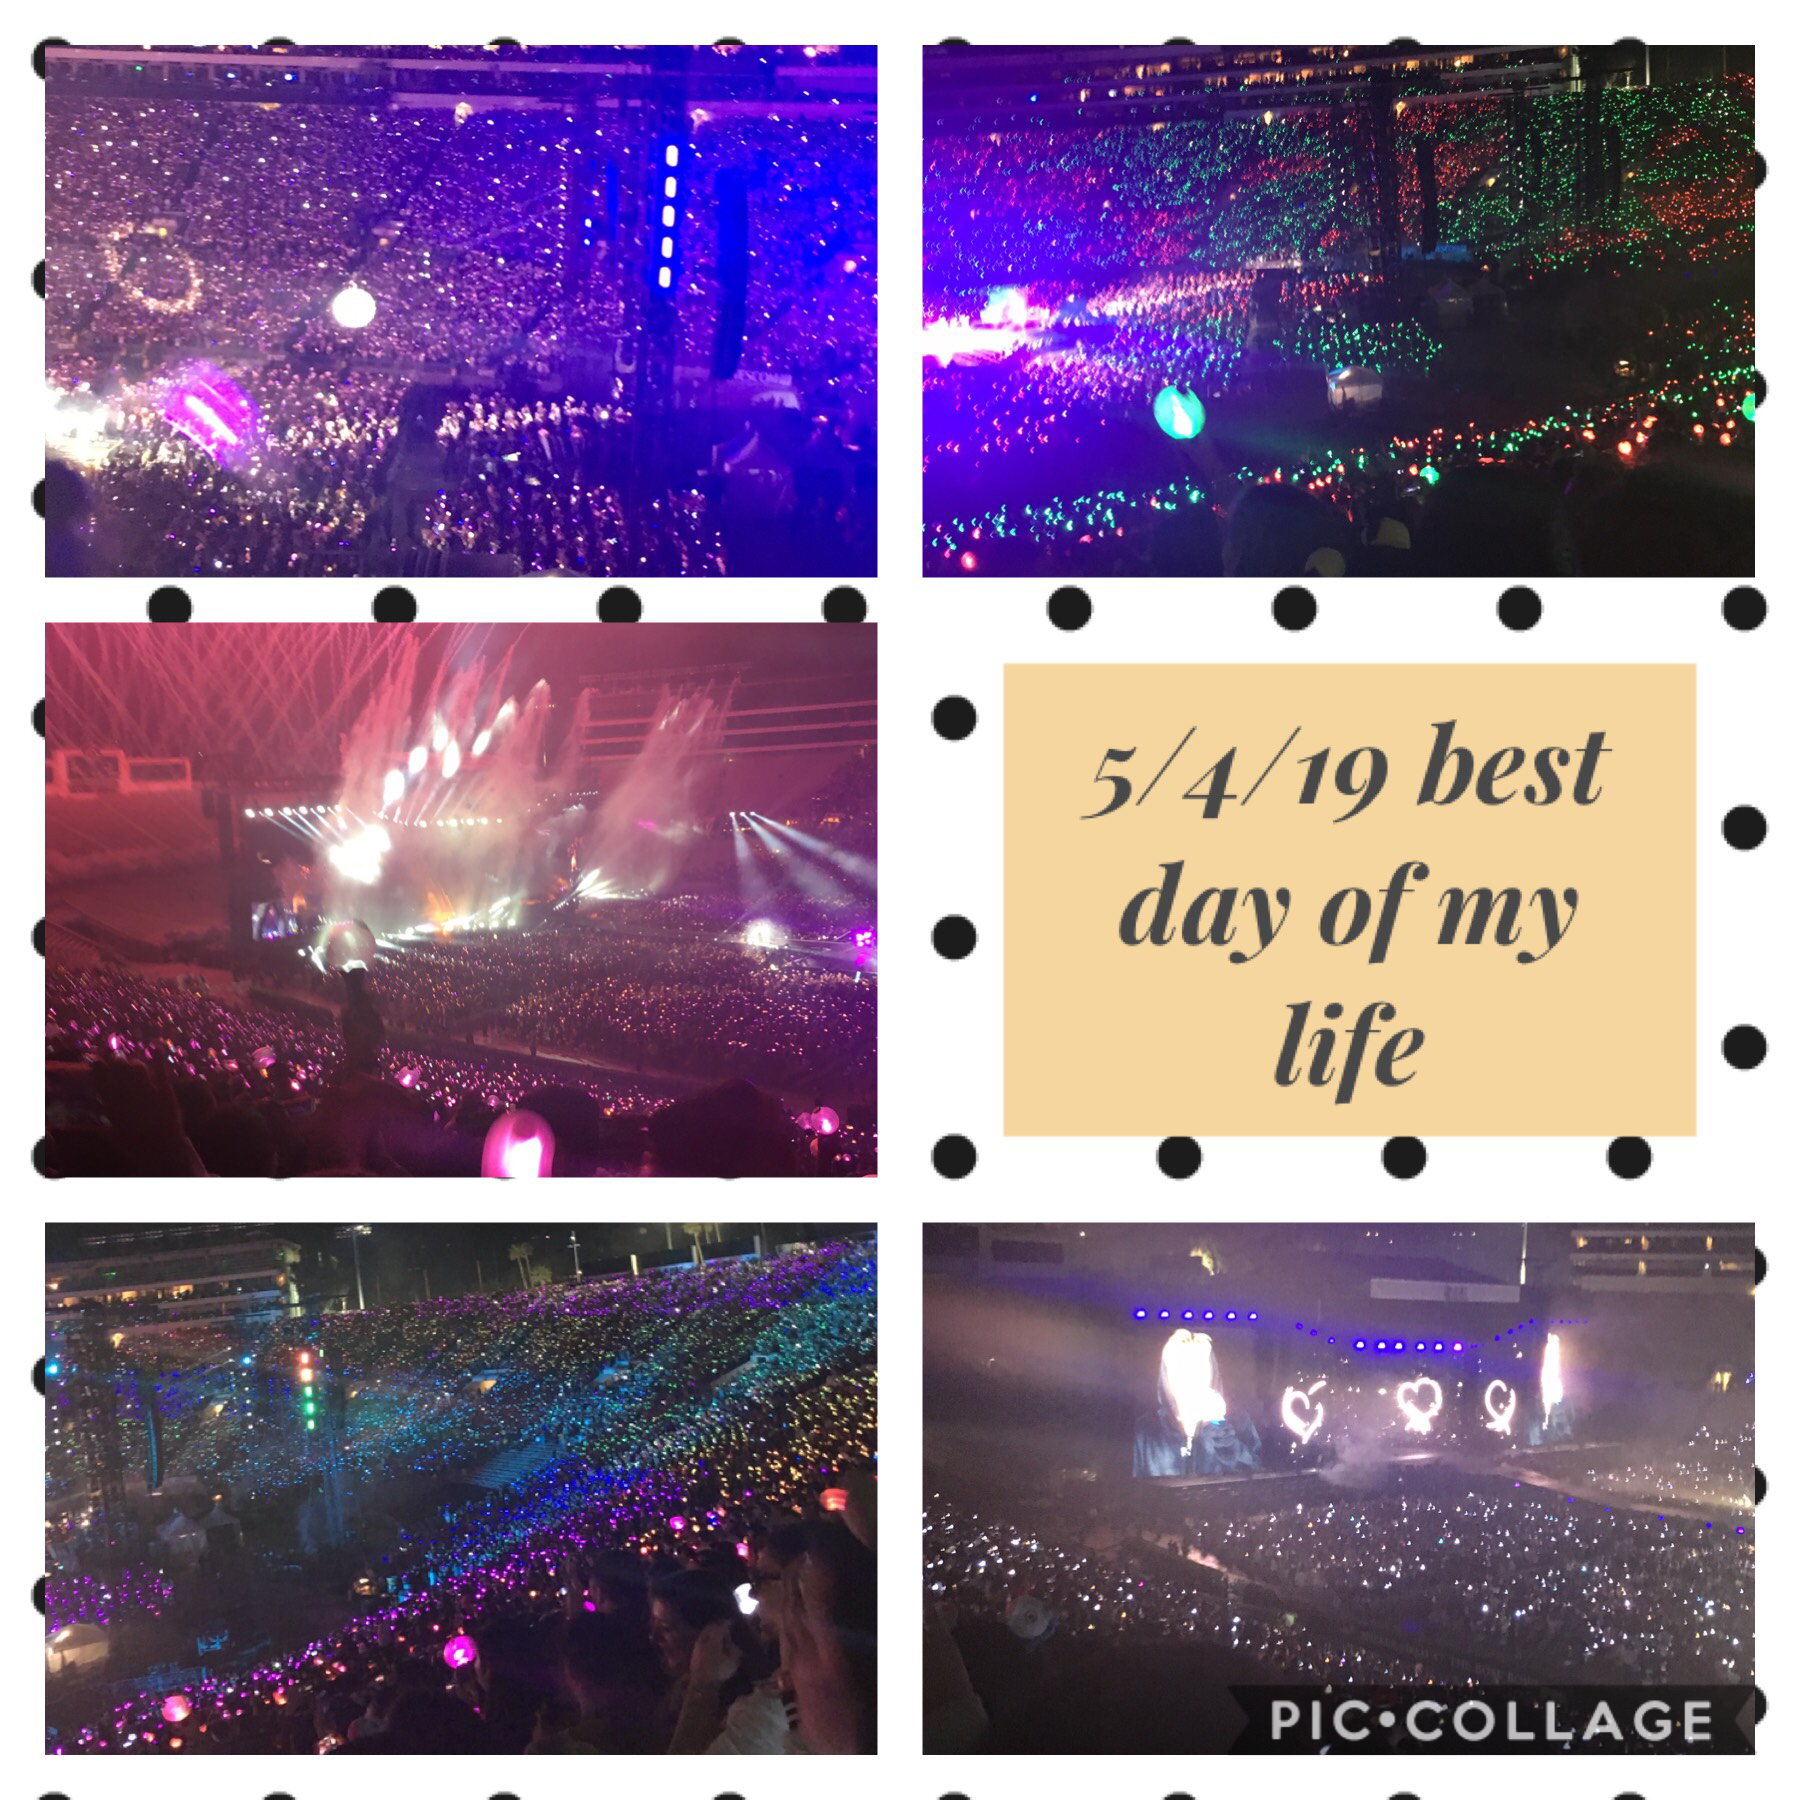 The best day of my life these are my own BTS concert pics from Saturday love you BTS💜